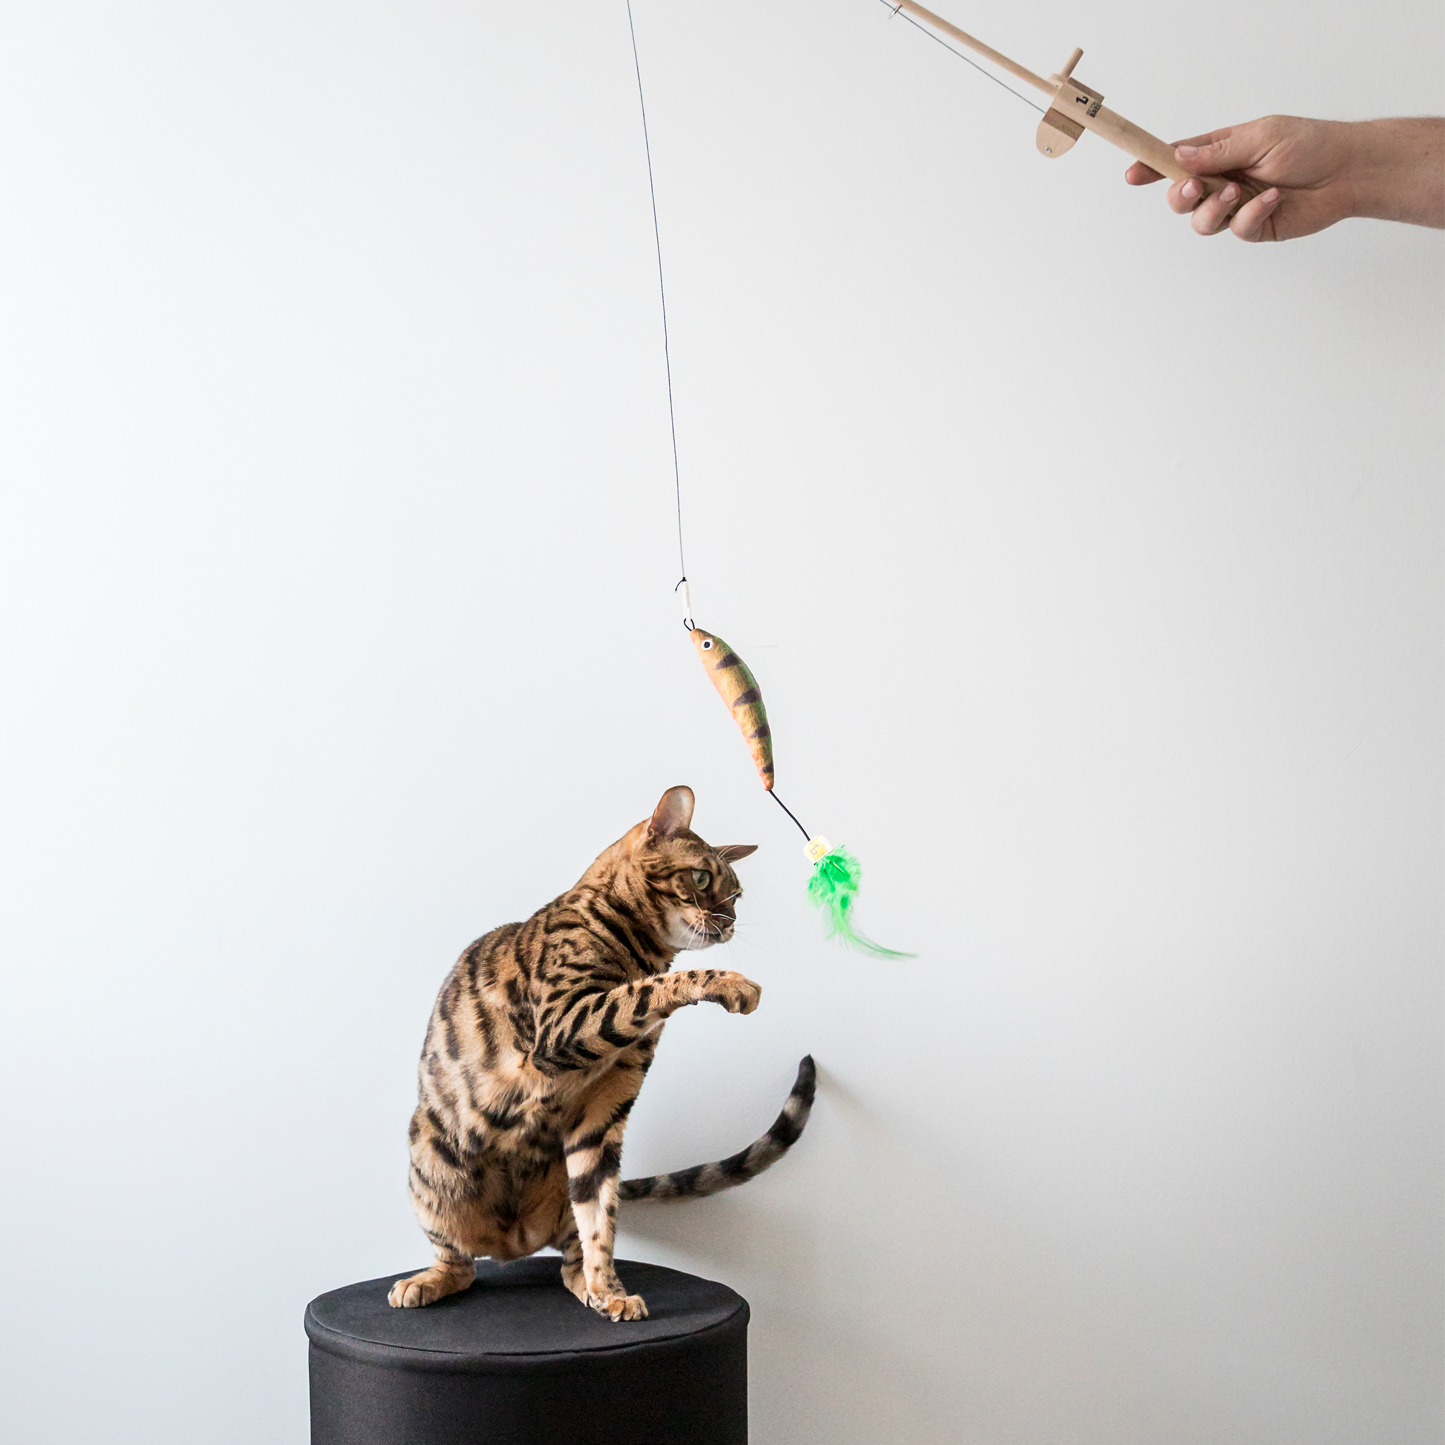 Toy Telescopic Fishing Rod with Reel for Cat